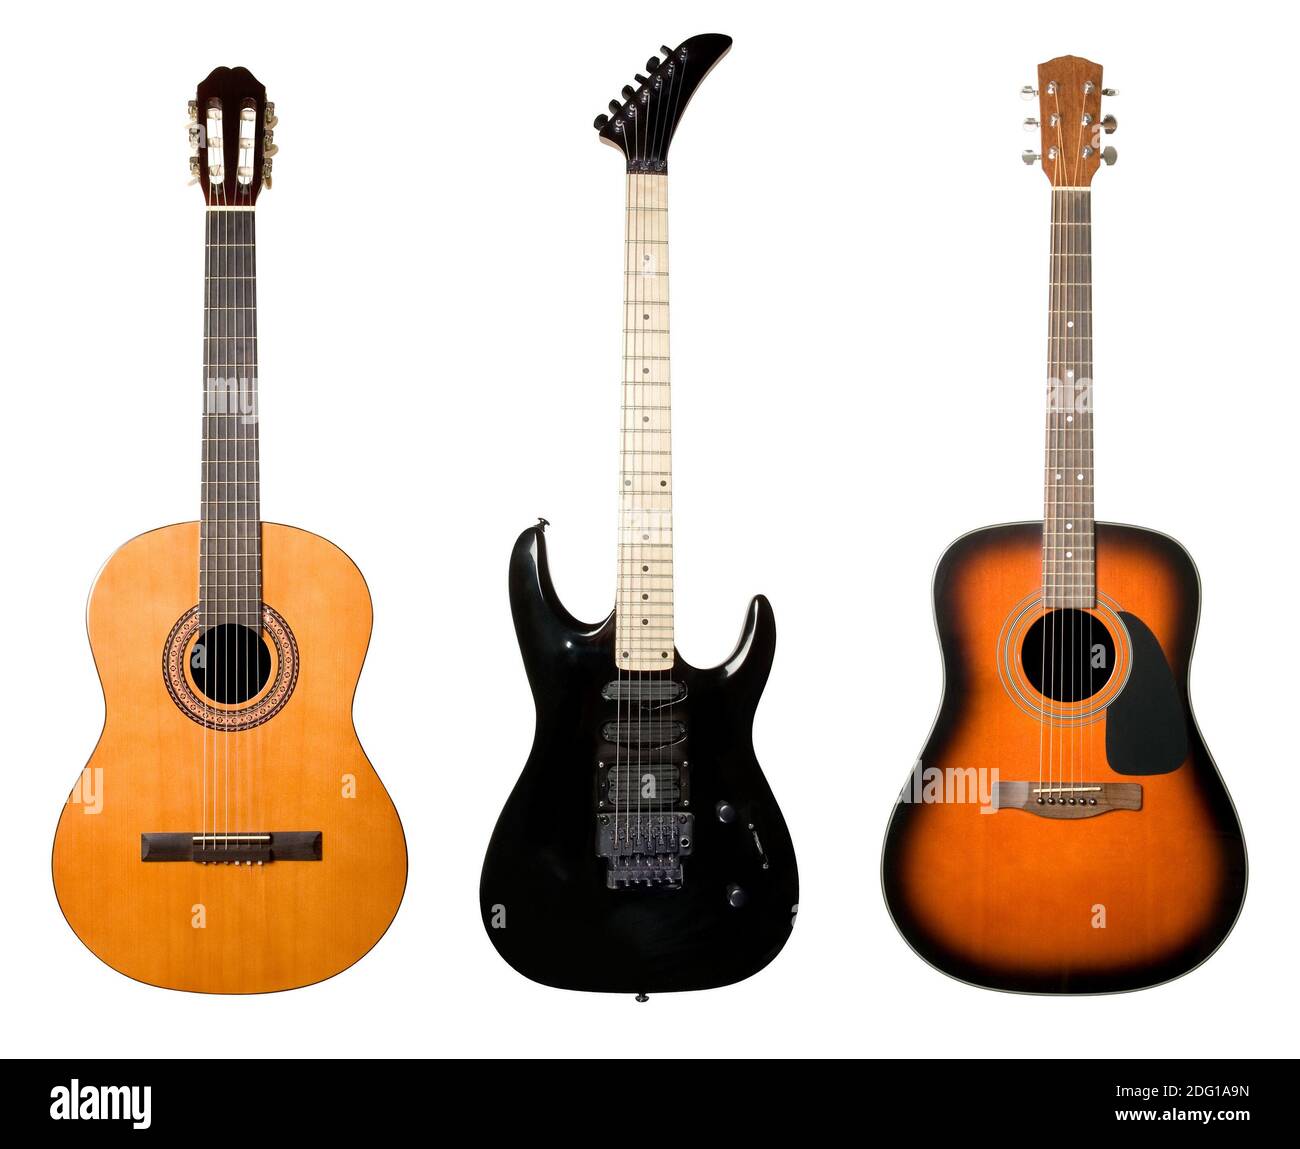 Guitars Cut Out Stock Images & Pictures - Alamy